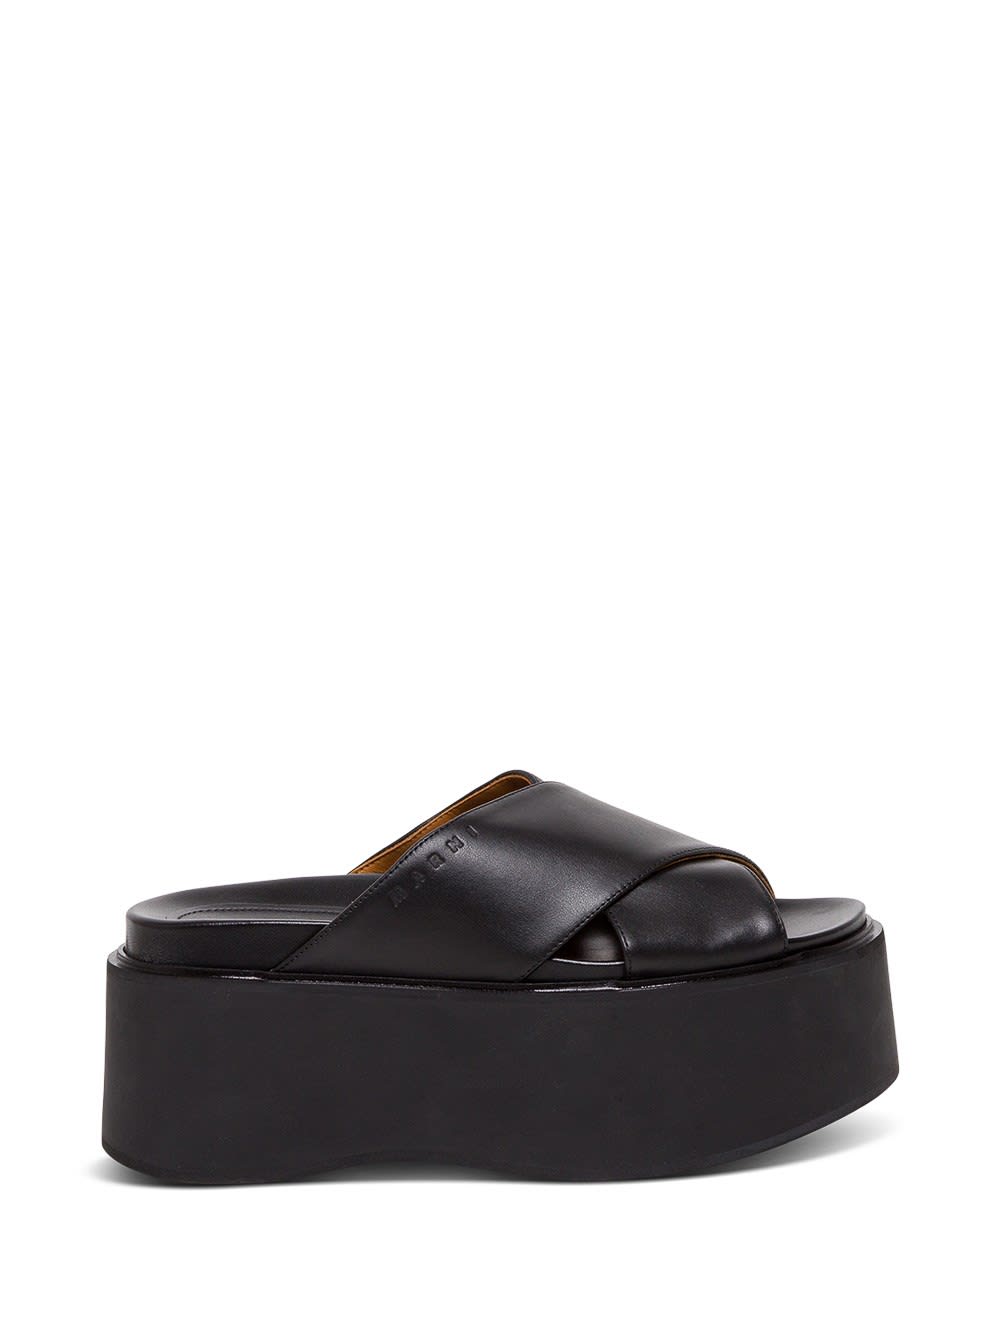 Buy Marni Crossed Sandals In Black Leather online, shop Marni shoes with free shipping